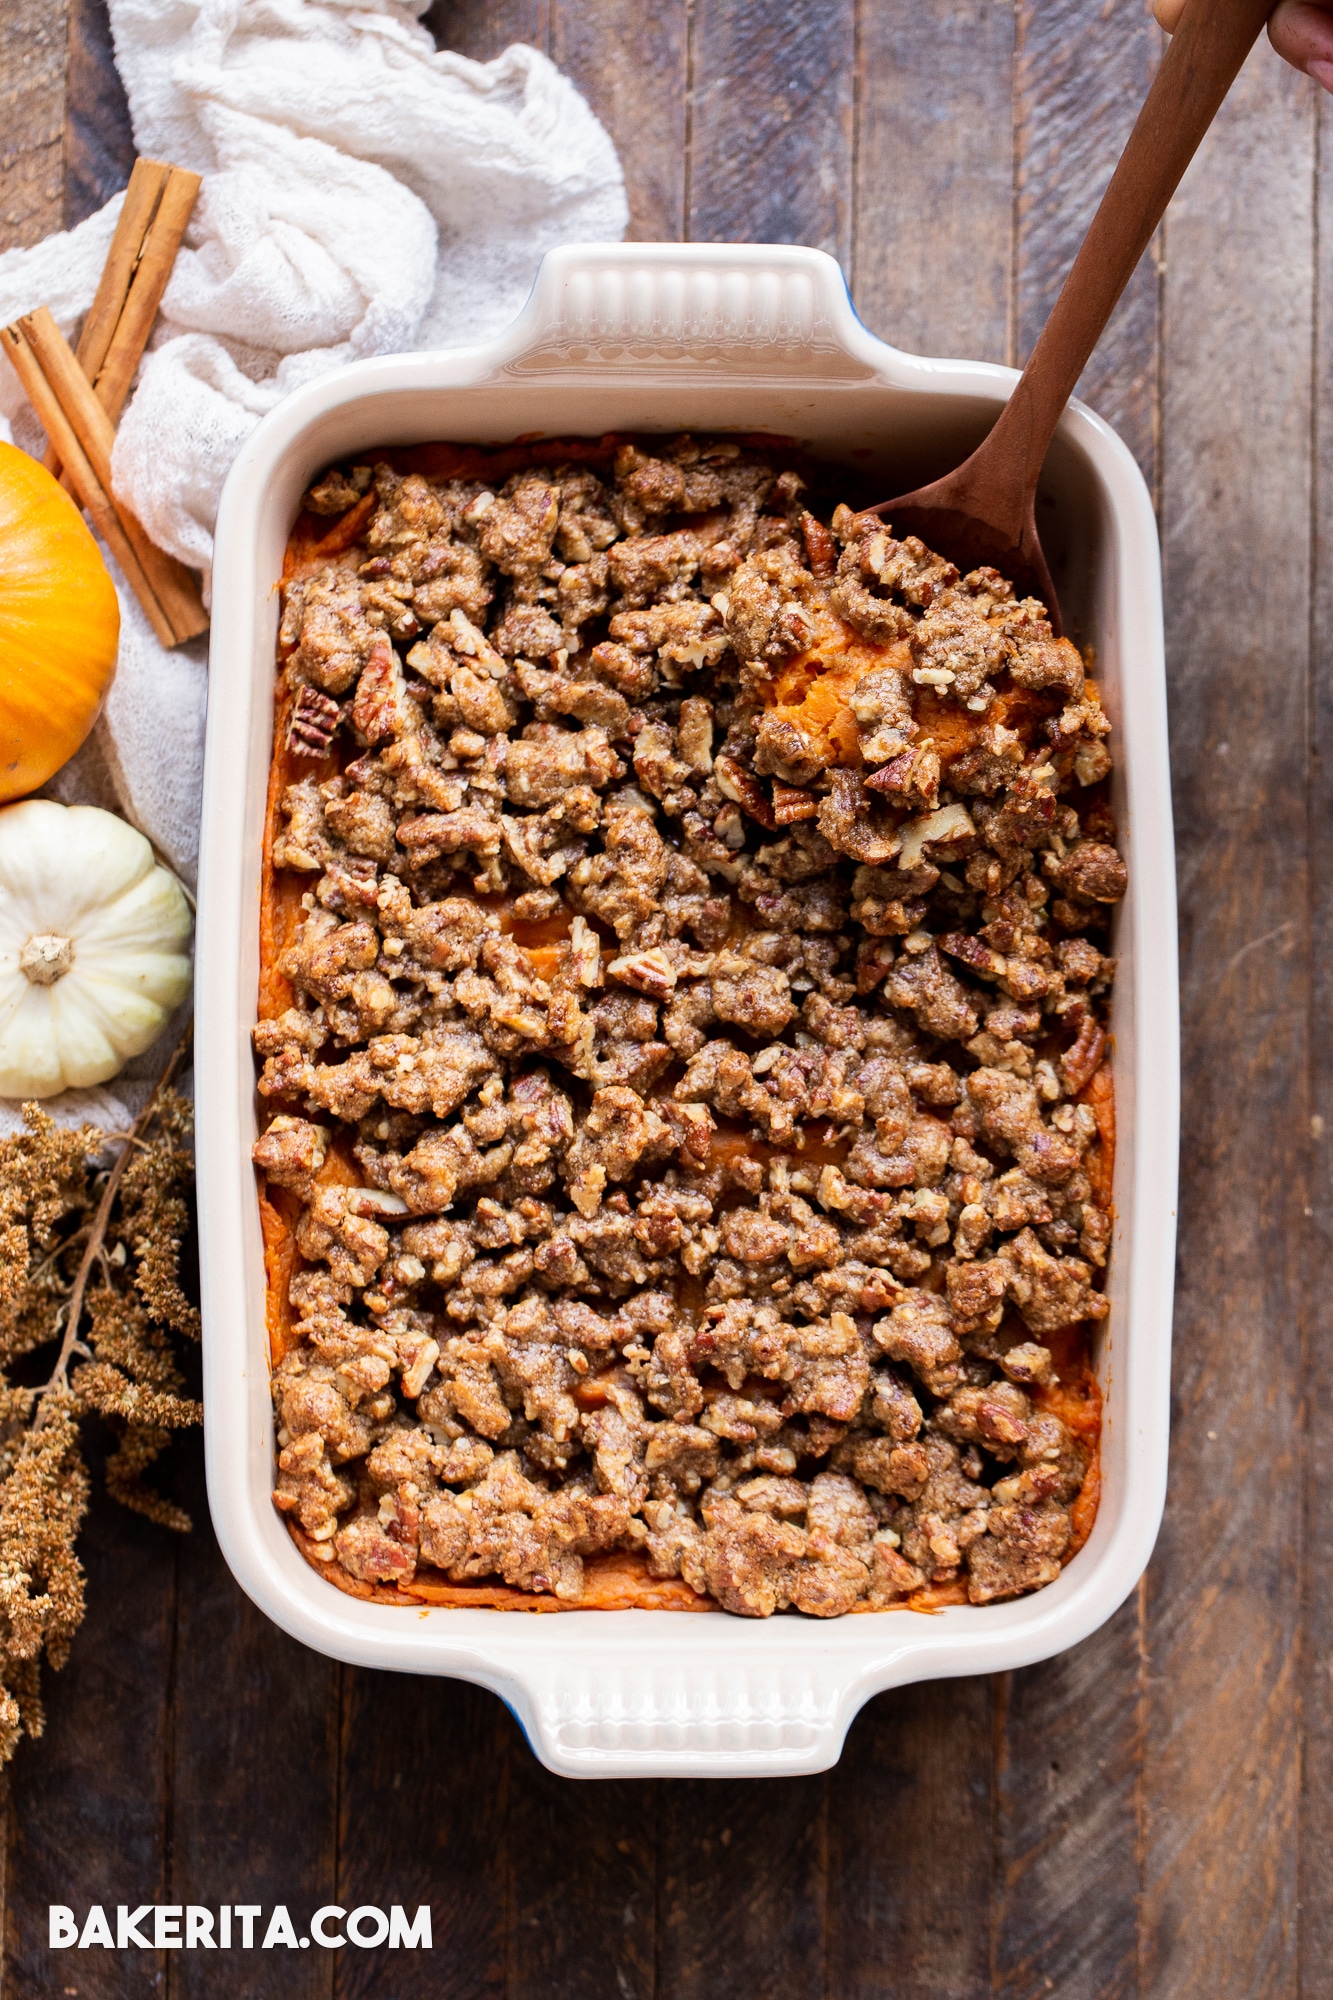 This Vegan Sweet Potato Casserole with Gluten-Free Pecan Crumble recipe is the best sweet potato casserole ever! It's made with fresh yams and coconut sugar for subtle sweetness that pairs perfectly with the rest of your holiday meal. With a crispy gluten-free pecan crumble topping, you'll definitely be serving yourself seconds. It's easy to make the day of, or can be prepared in advance for an easy make-ahead holiday side dish.